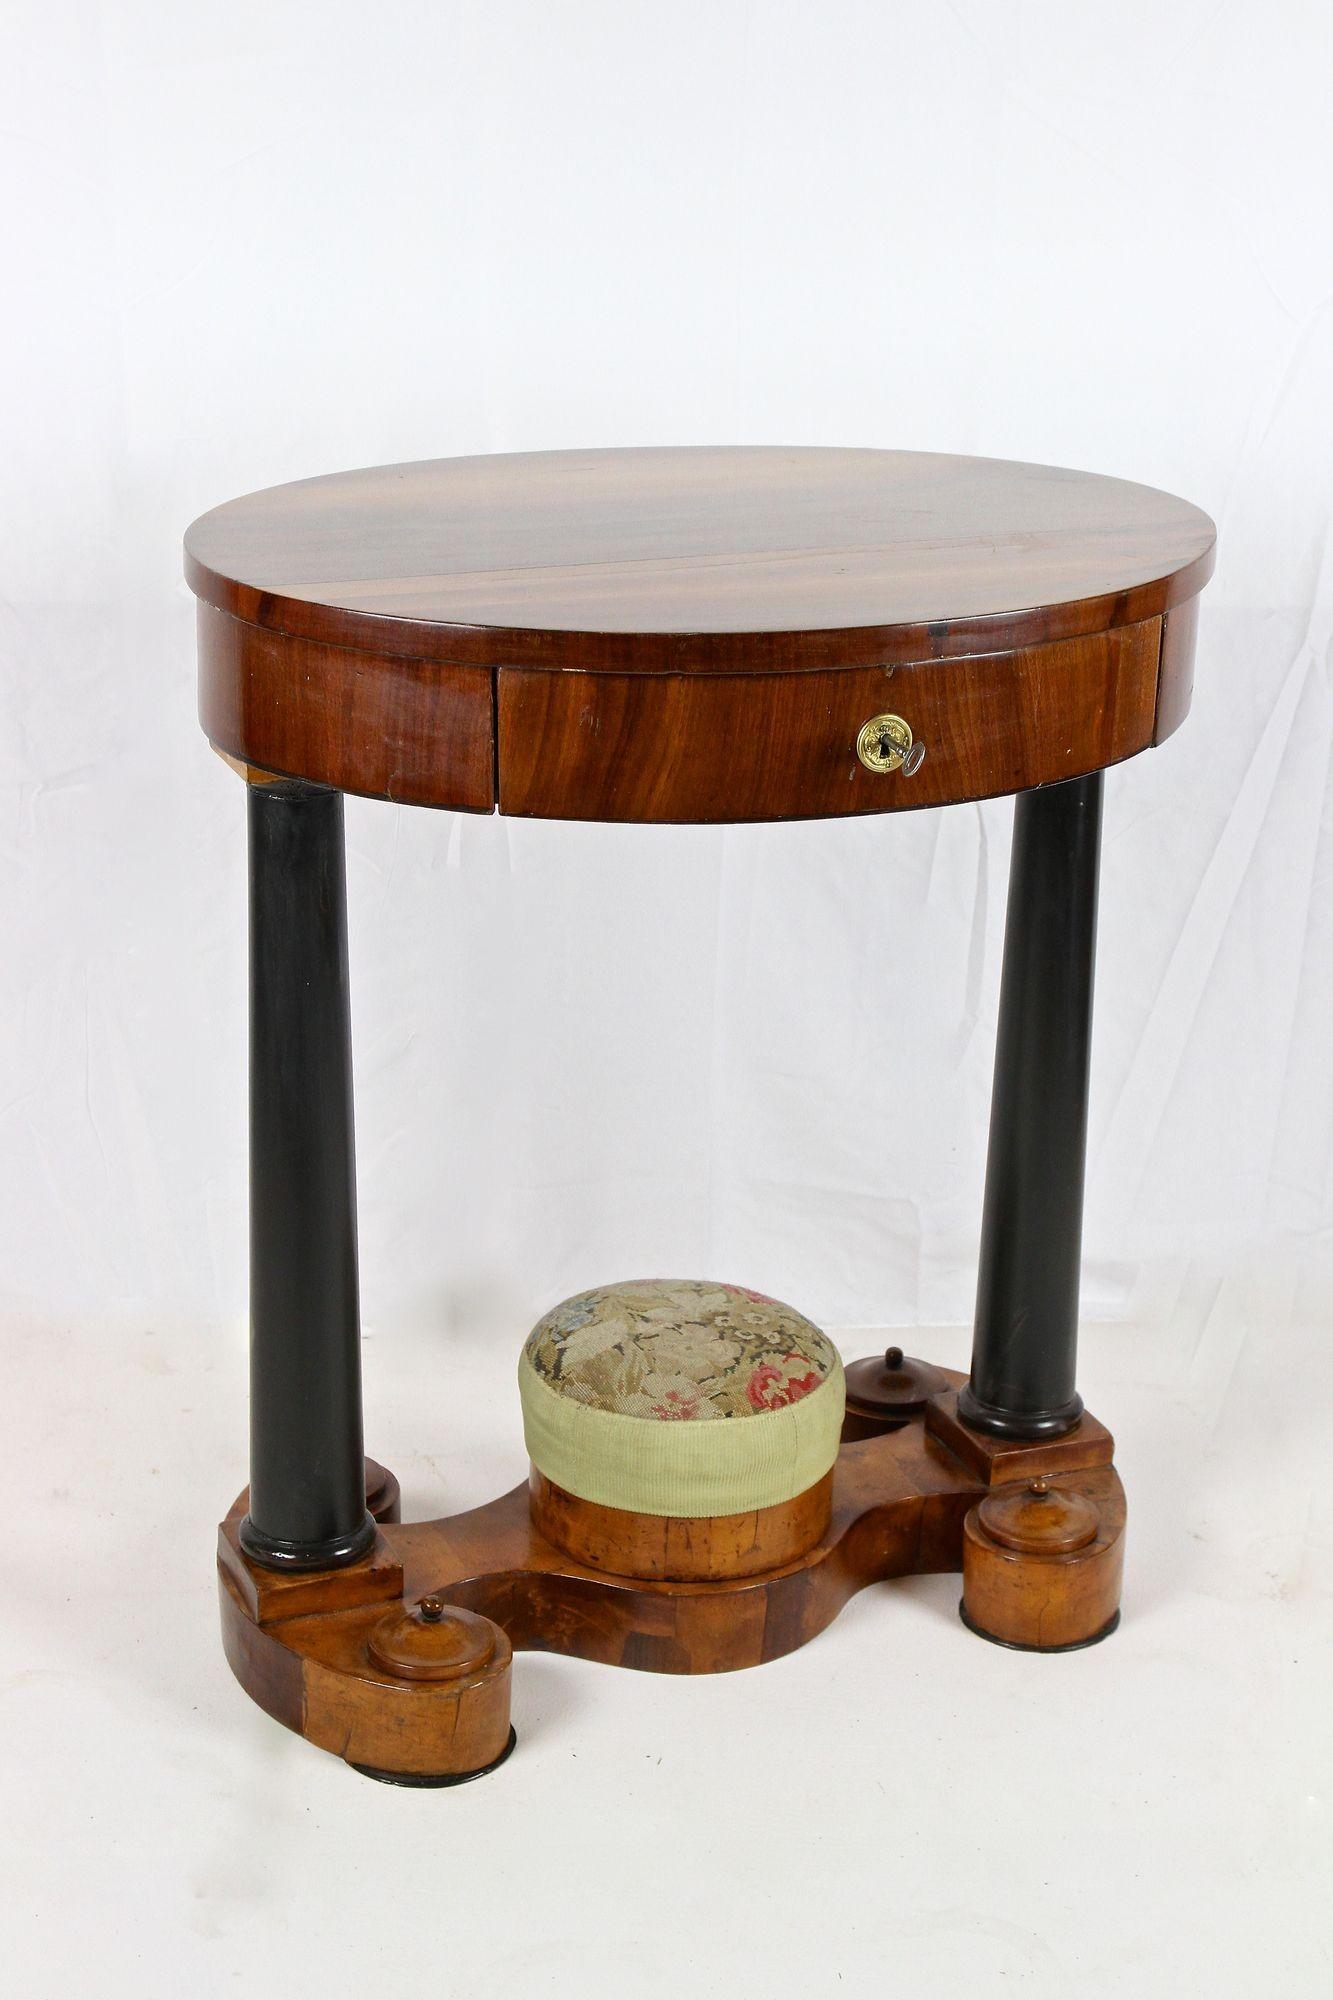 Lovely oval Biedermeier nutwood side table / sewing table coming from the renowed Biedermeier period in Hungary around 1835. With an age of over 190 years this charming 